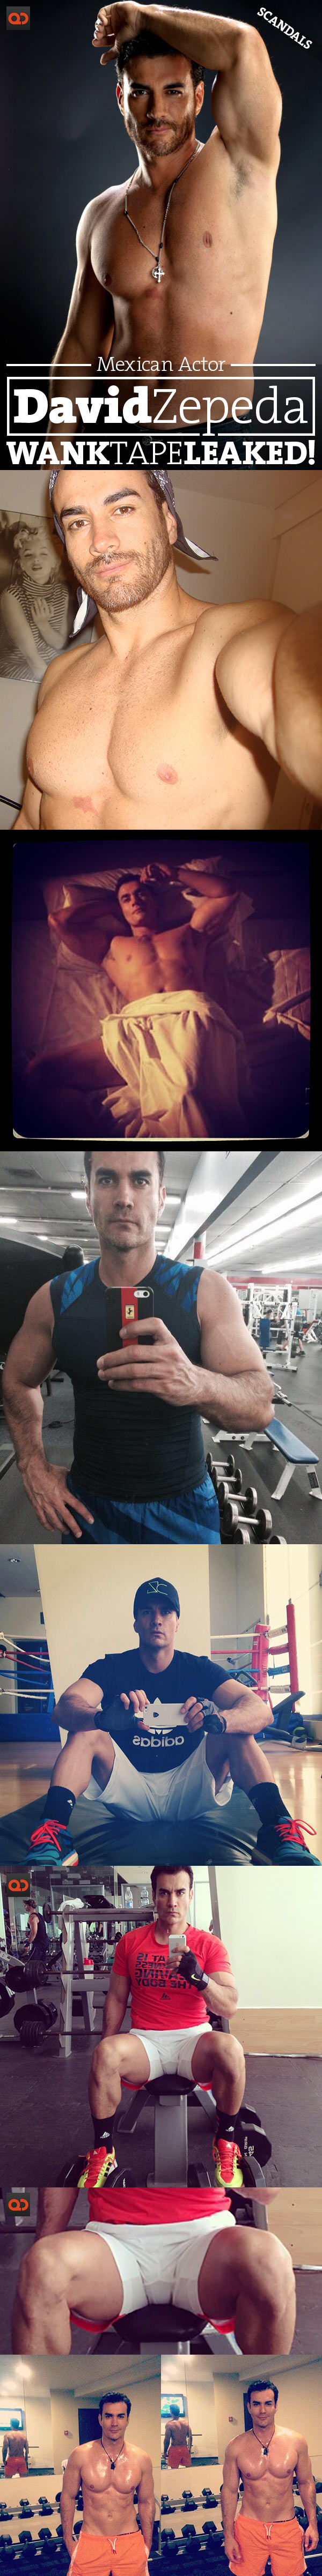 QC Scandals: David Zepeda, Mexican Actor, Exposed Photo And Wank Tape Leaked!